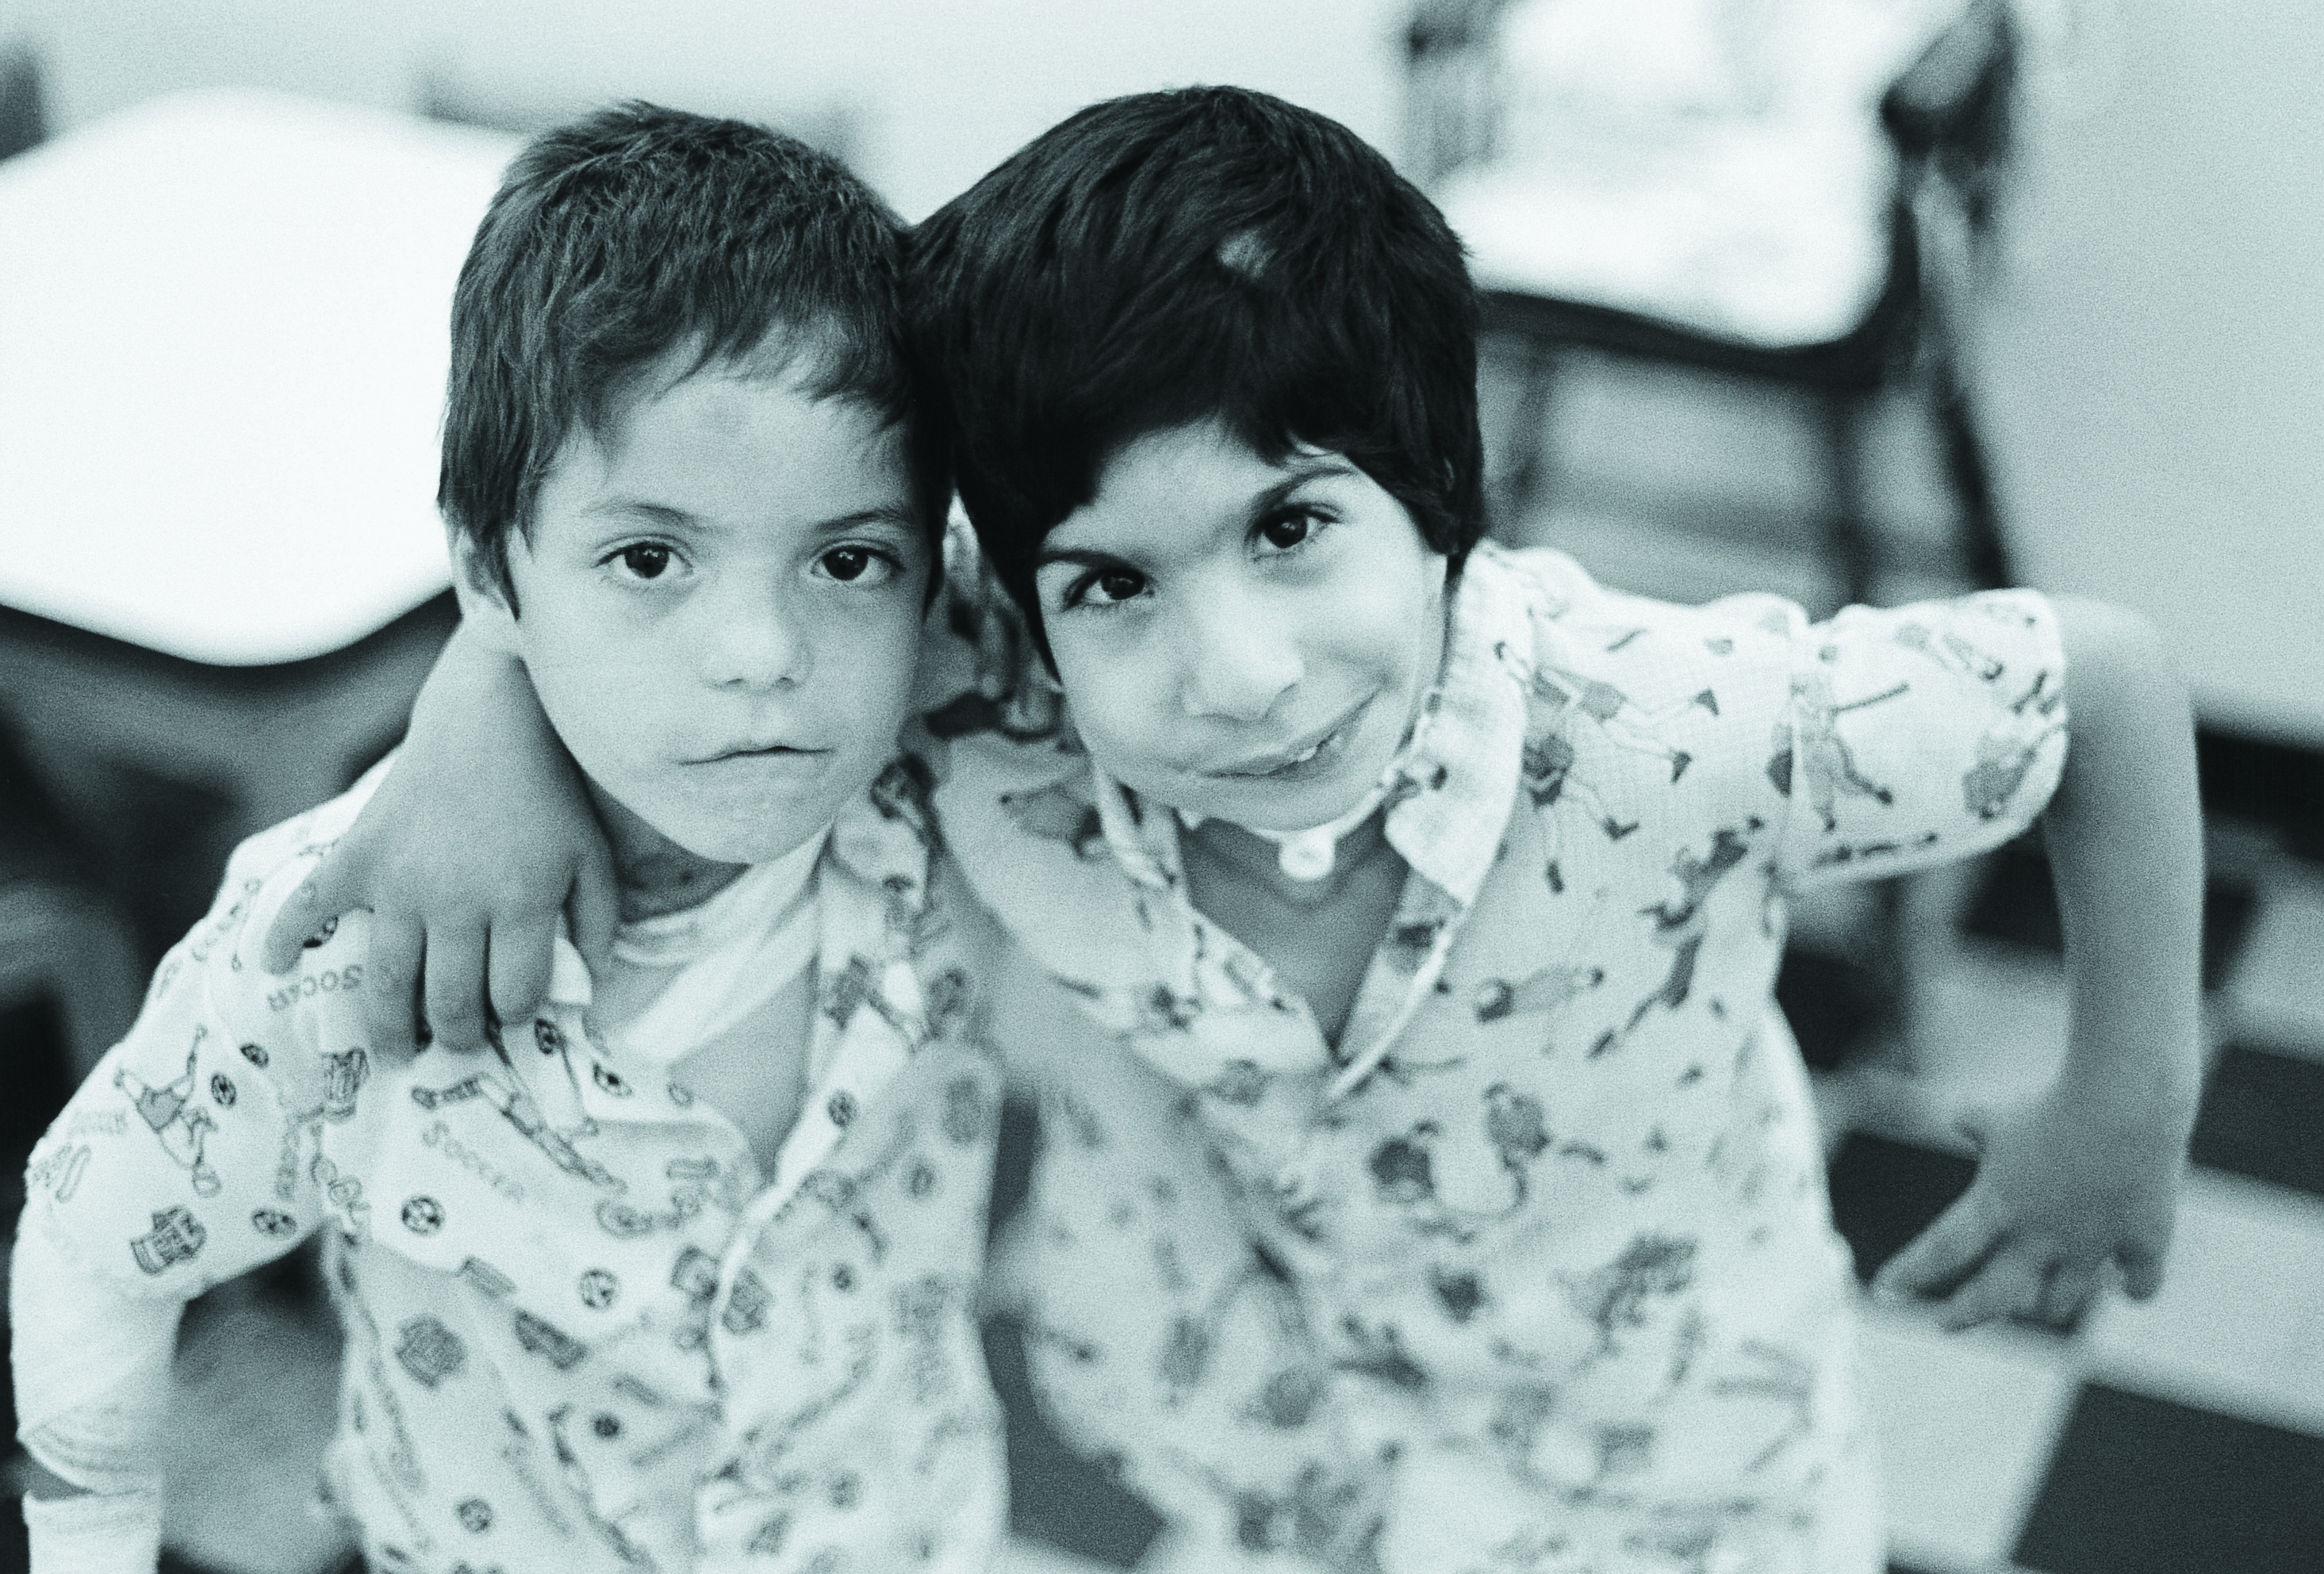 Two young boys with disabilities